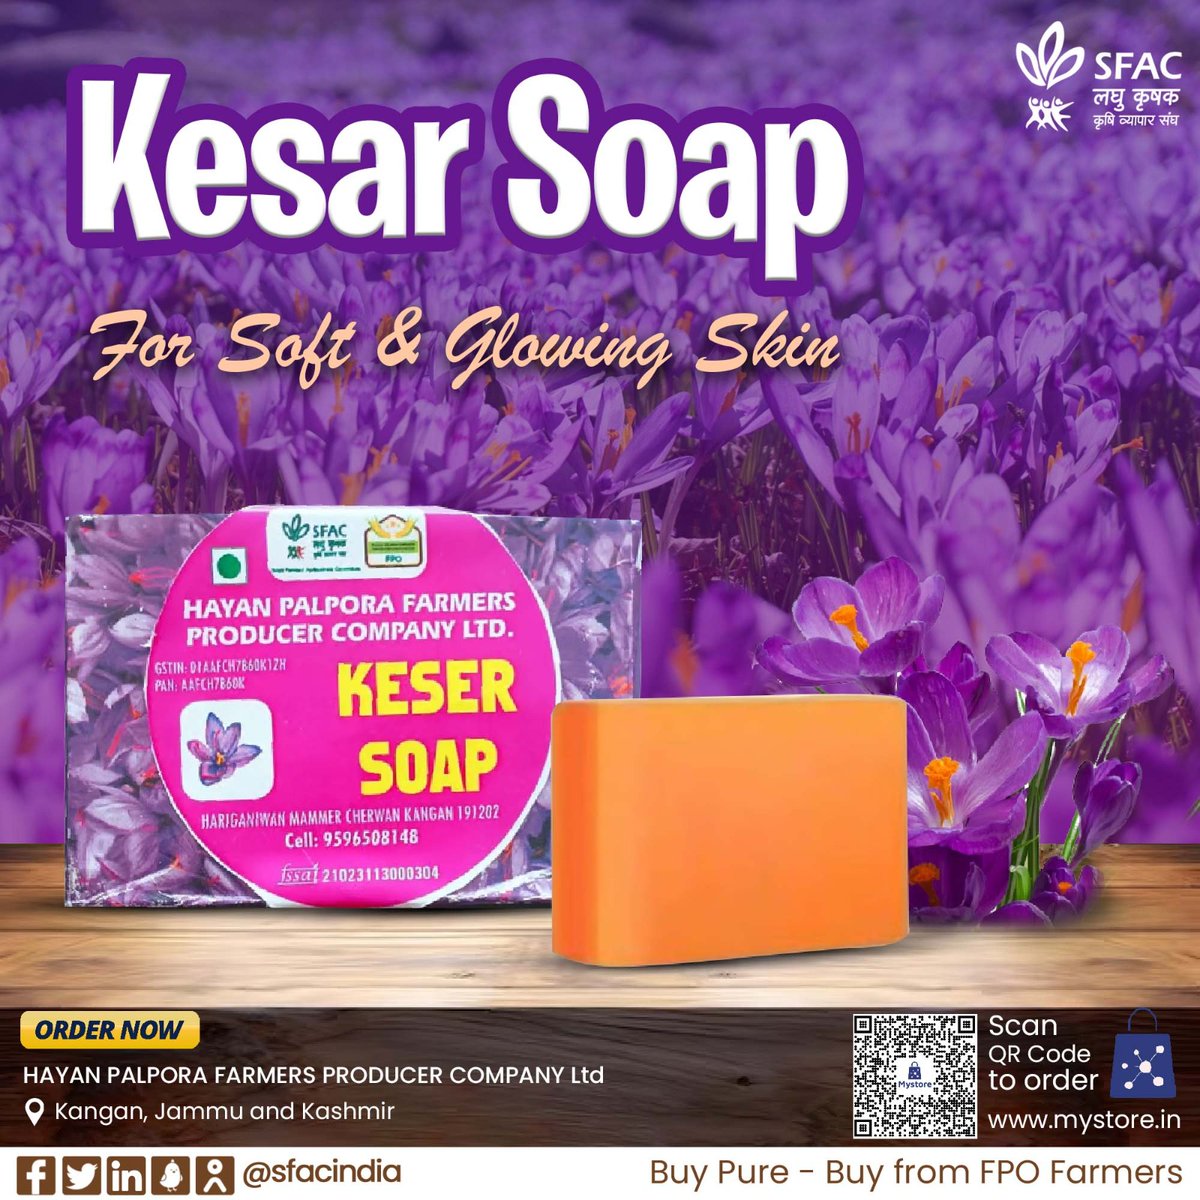 This handmade soap from a Blend of pure saffron, camphor & coconut oil exfoliates & rejuvenates your skin naturally. Buy straight from FPO farmers at👇 mystore.in/en/product/kes… 🧼 #VocalForLocal #healthyskin #kesar #healthychoice